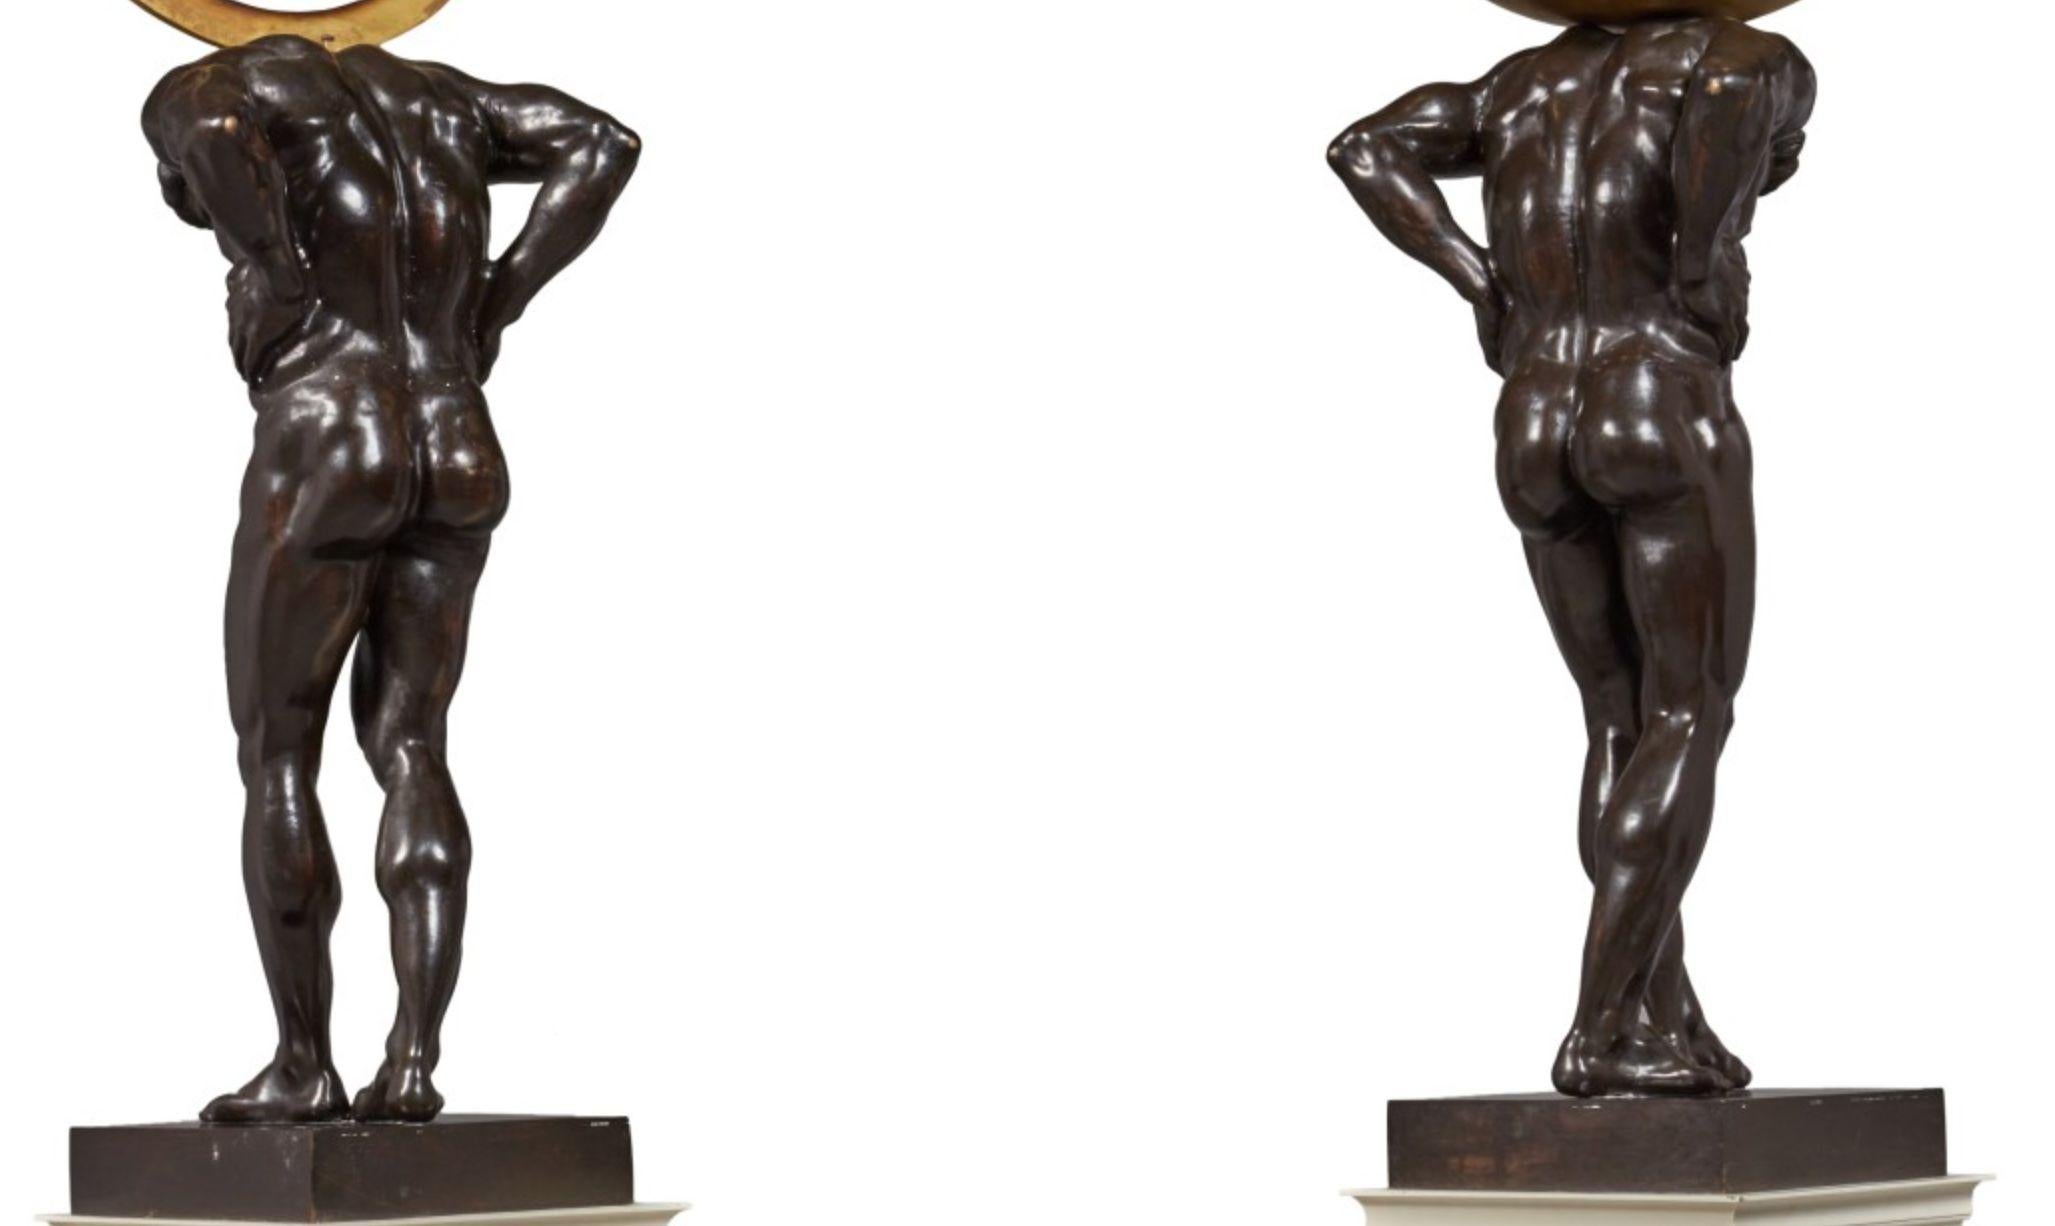 Monumental Pair of Gilt and Patinated Bronze Atlas Figures Sculptures 2